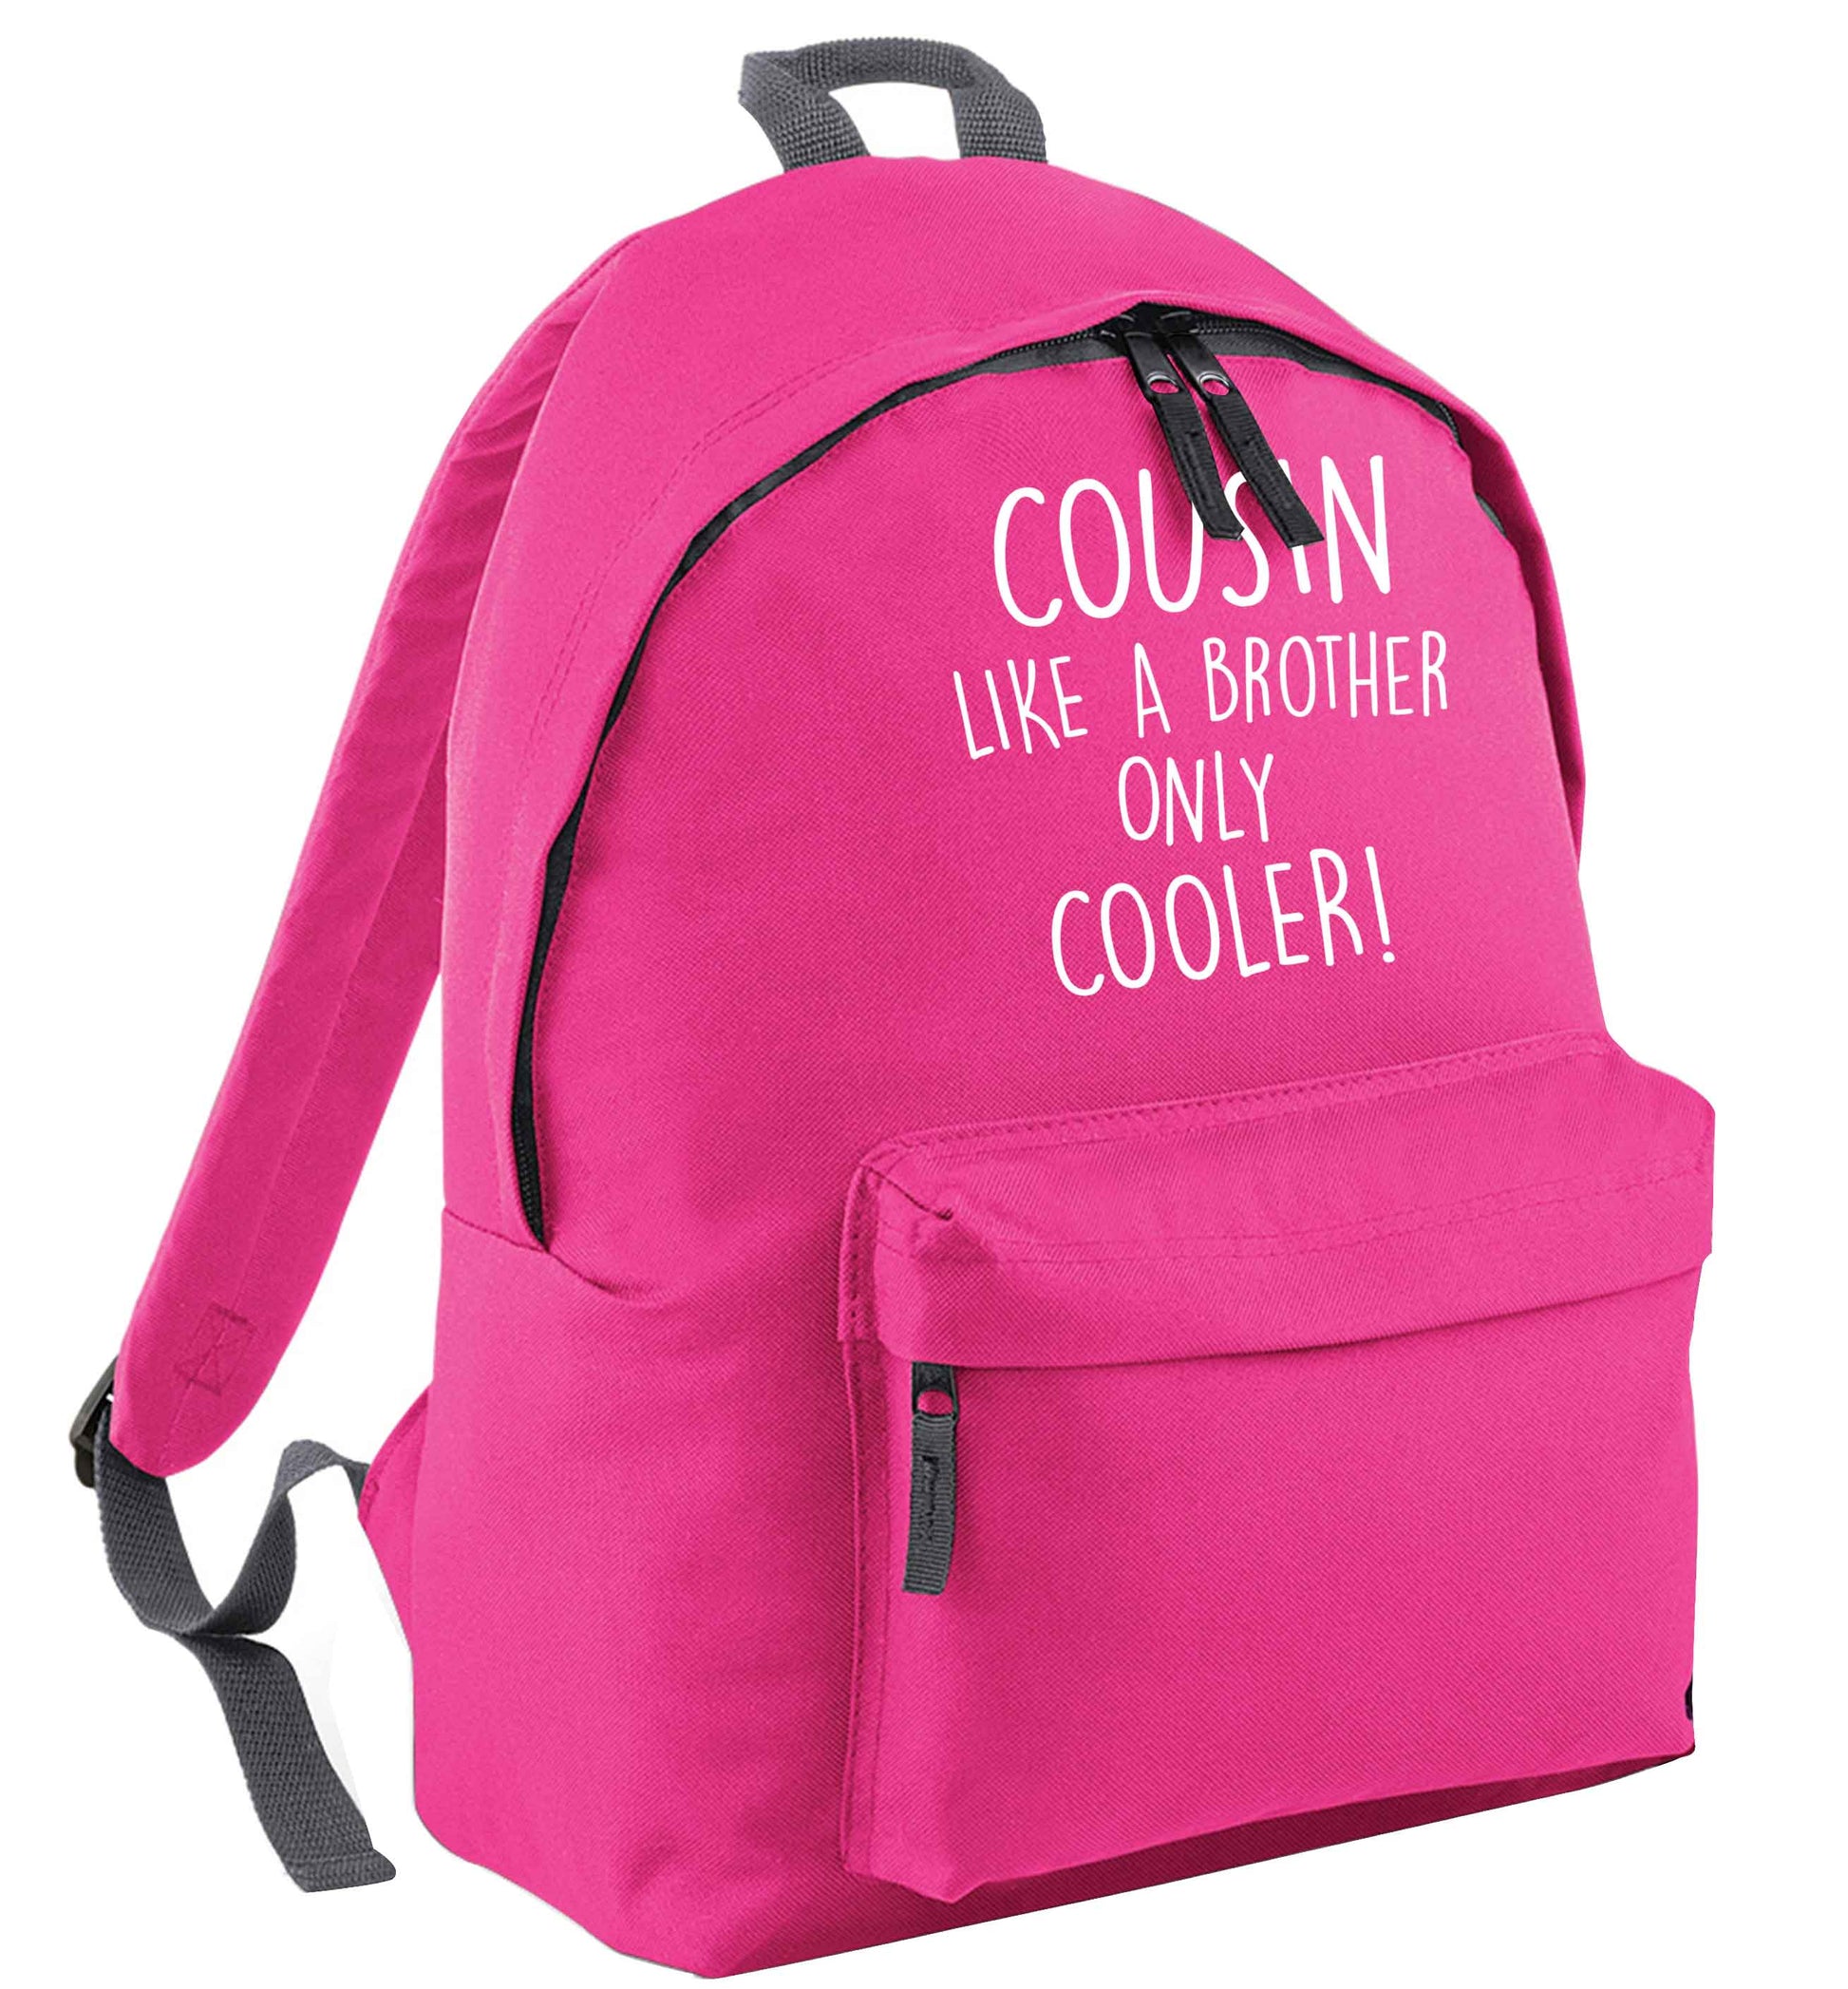 Cousin like a brother only cooler pink adults backpack